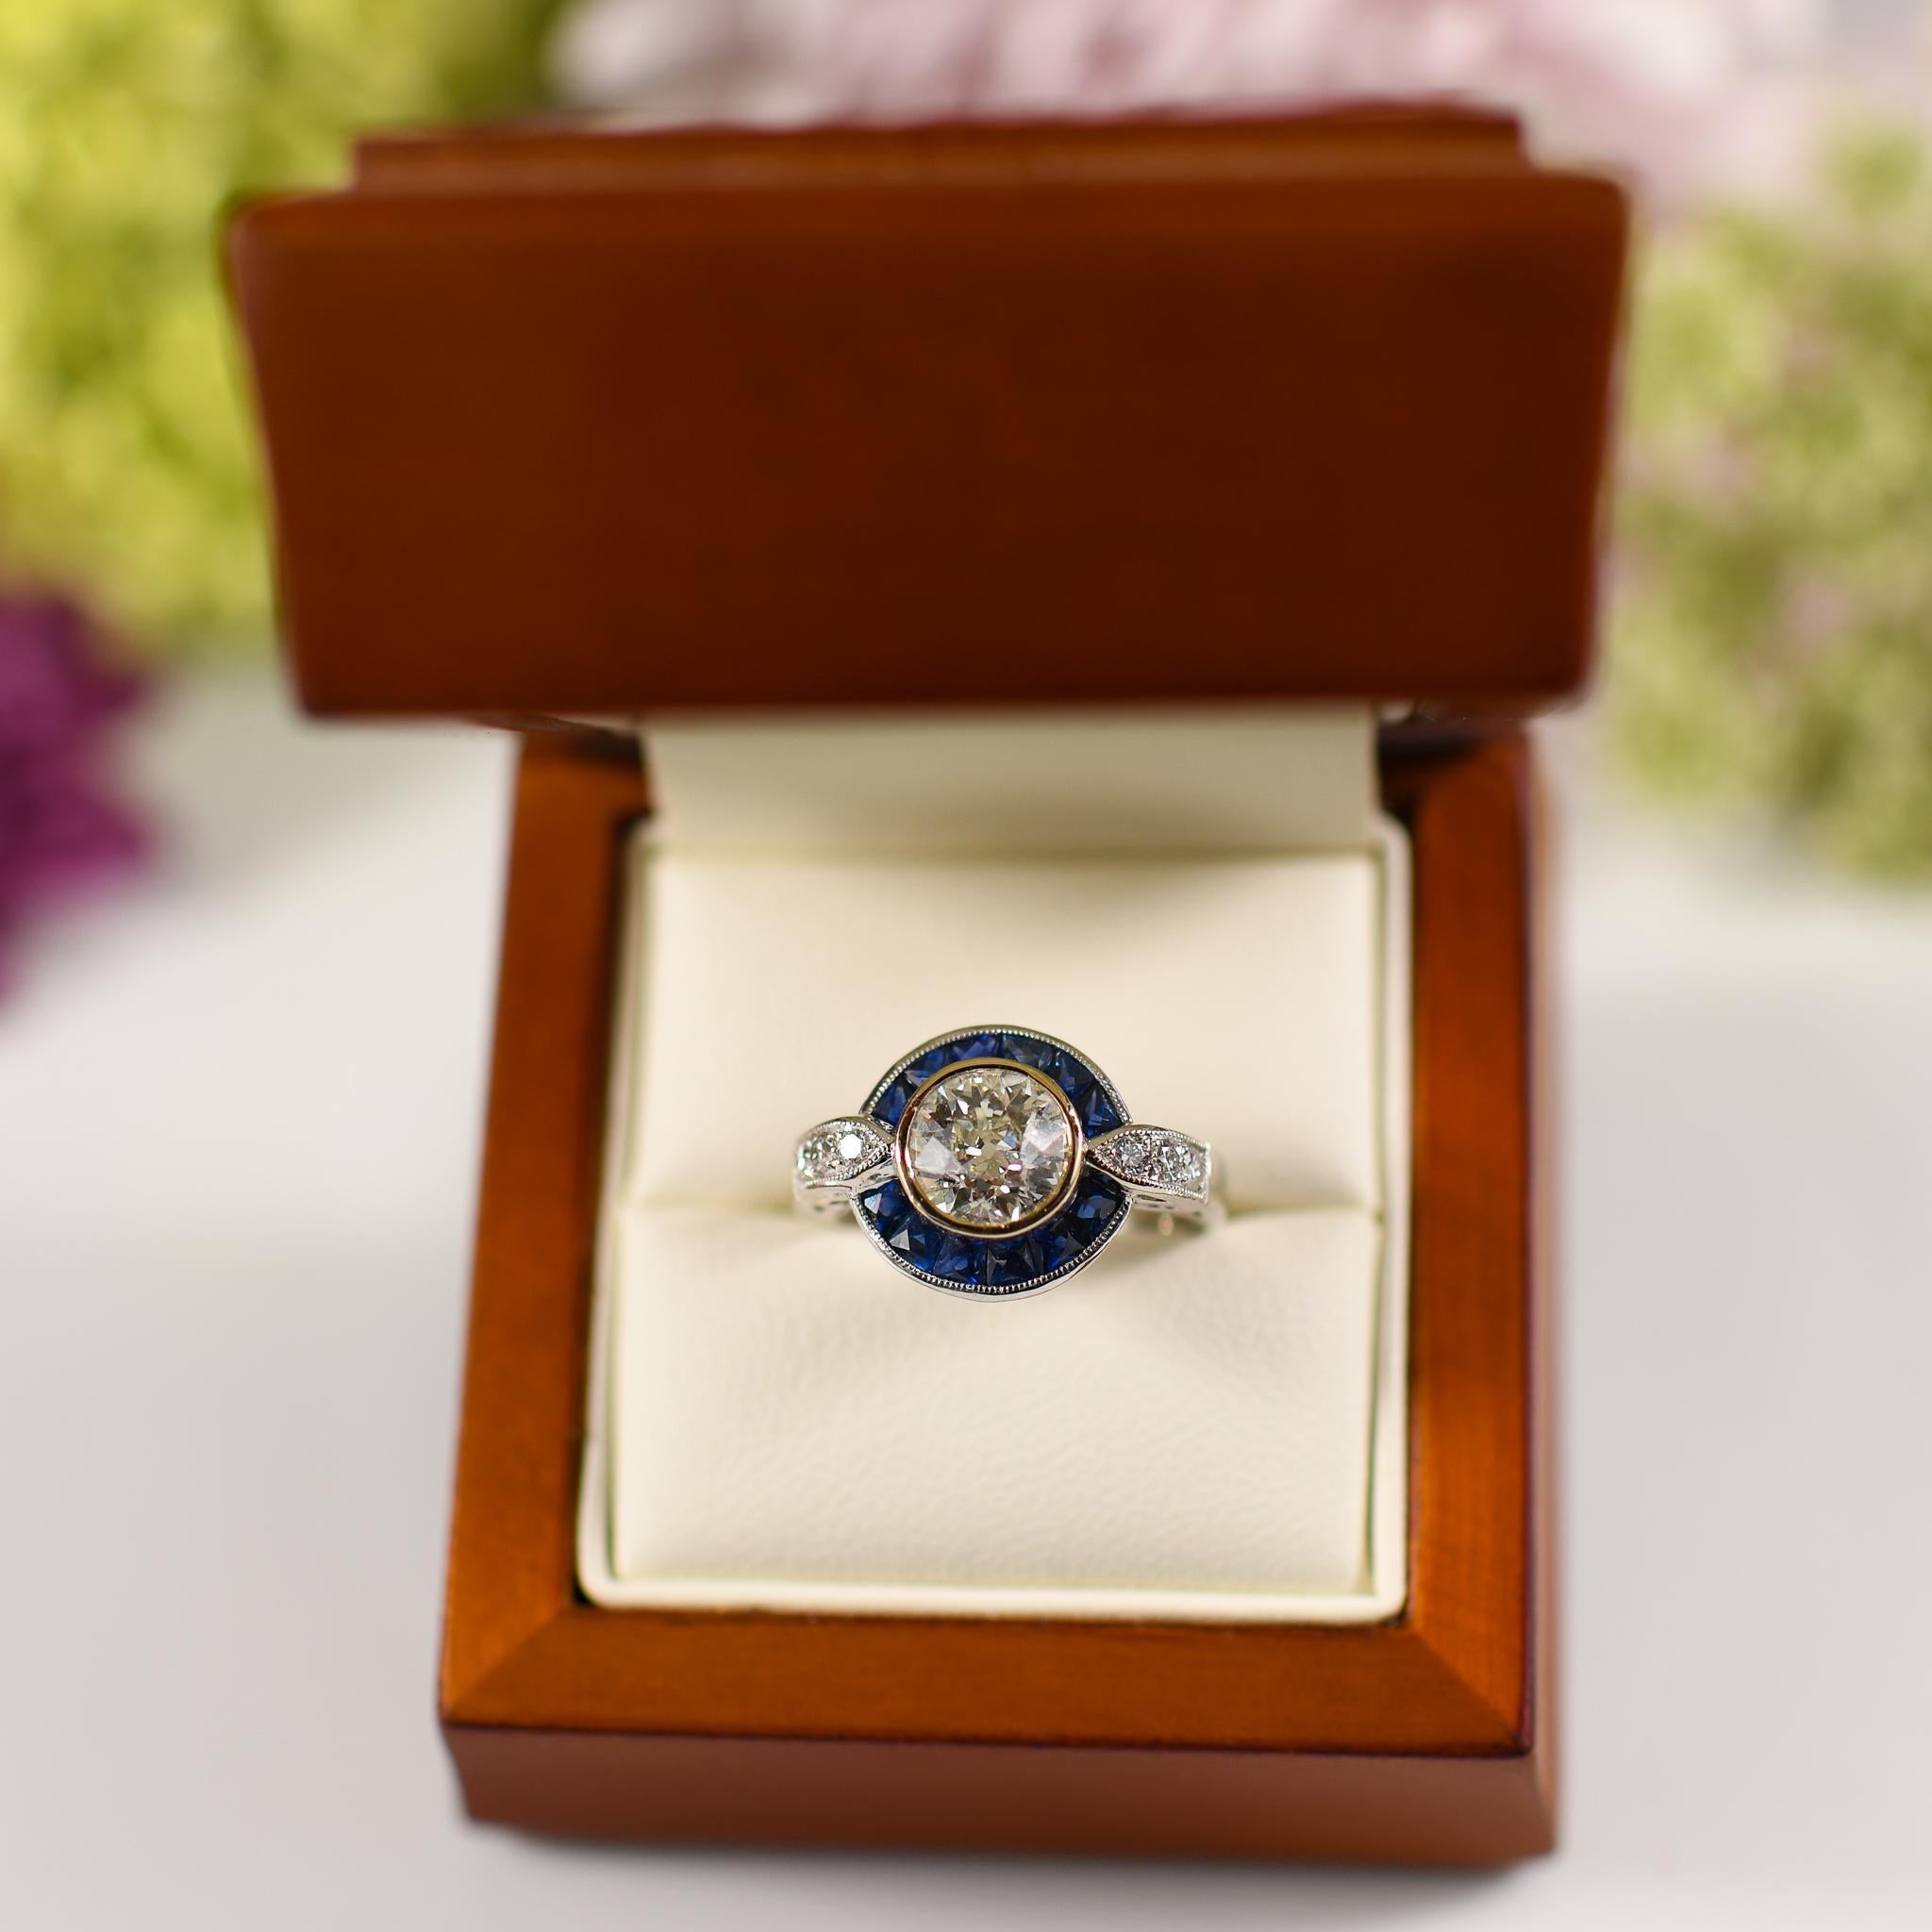 1.43ct Old European Cut Diamond & French Cut Sapphire Art Deco Inspired 18K Ring In Good Condition For Sale In Addison, TX